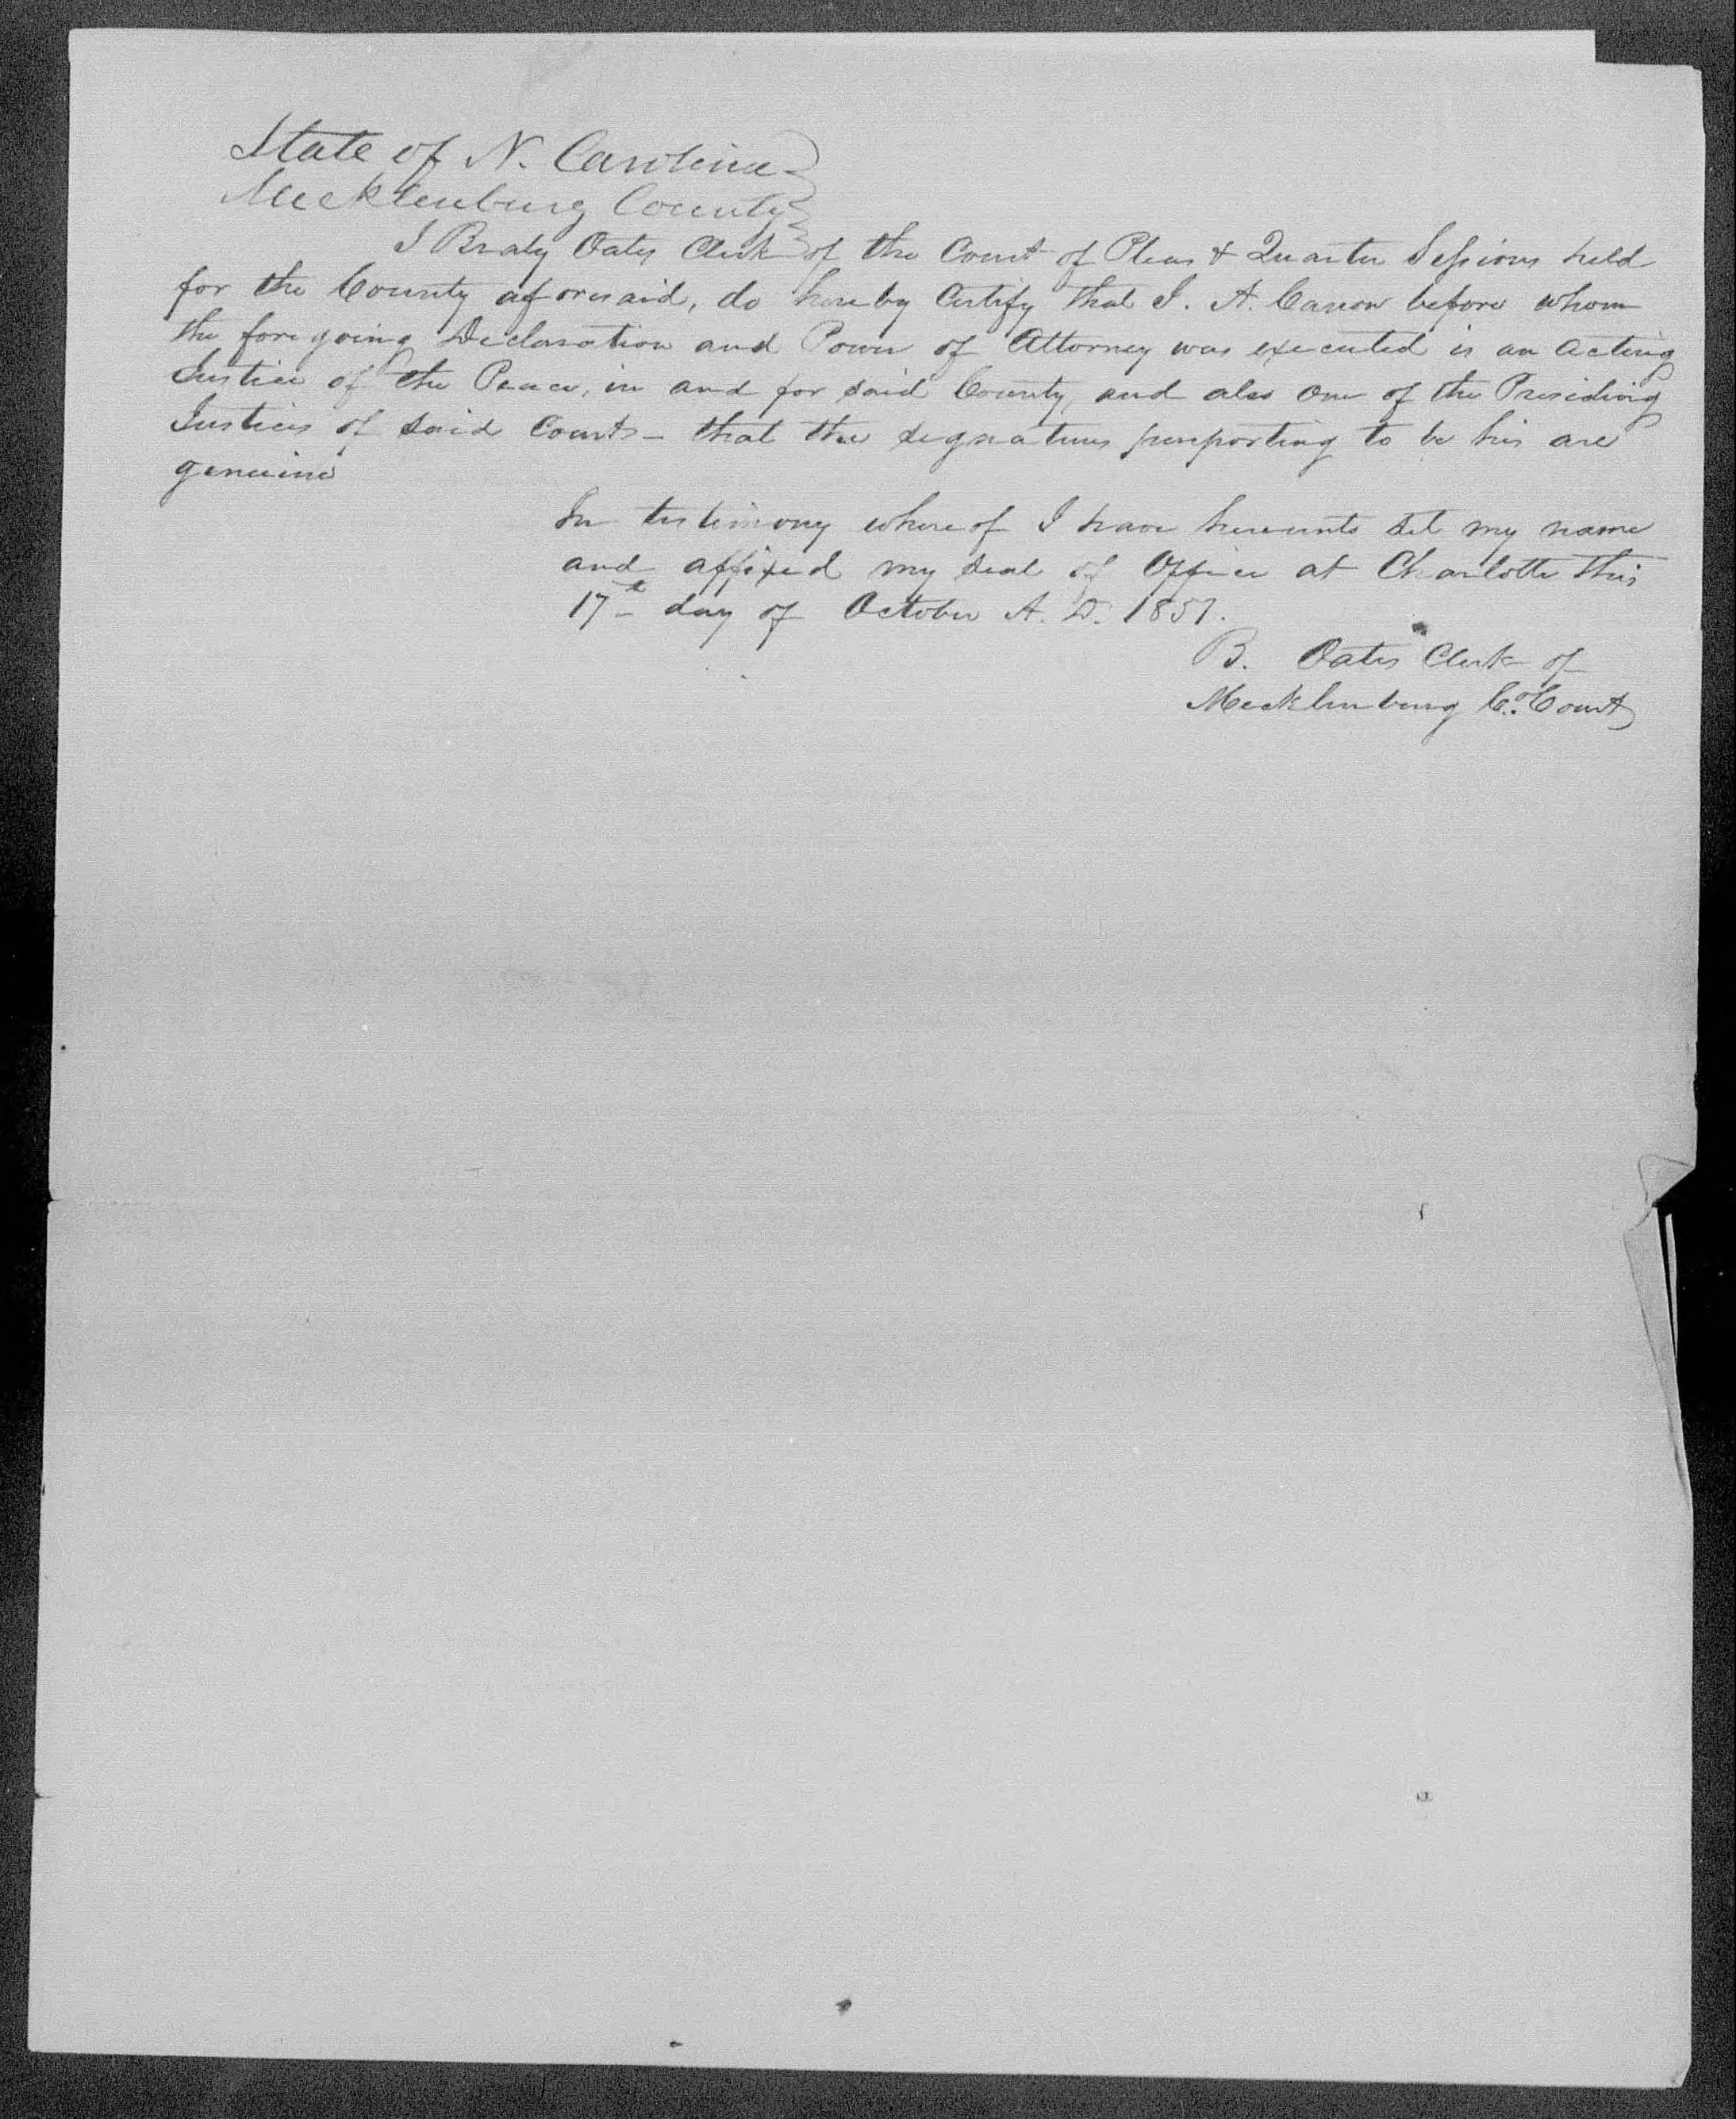 Application for a Widow's Pension from Susana Alexander, 13 October 1851, page 3